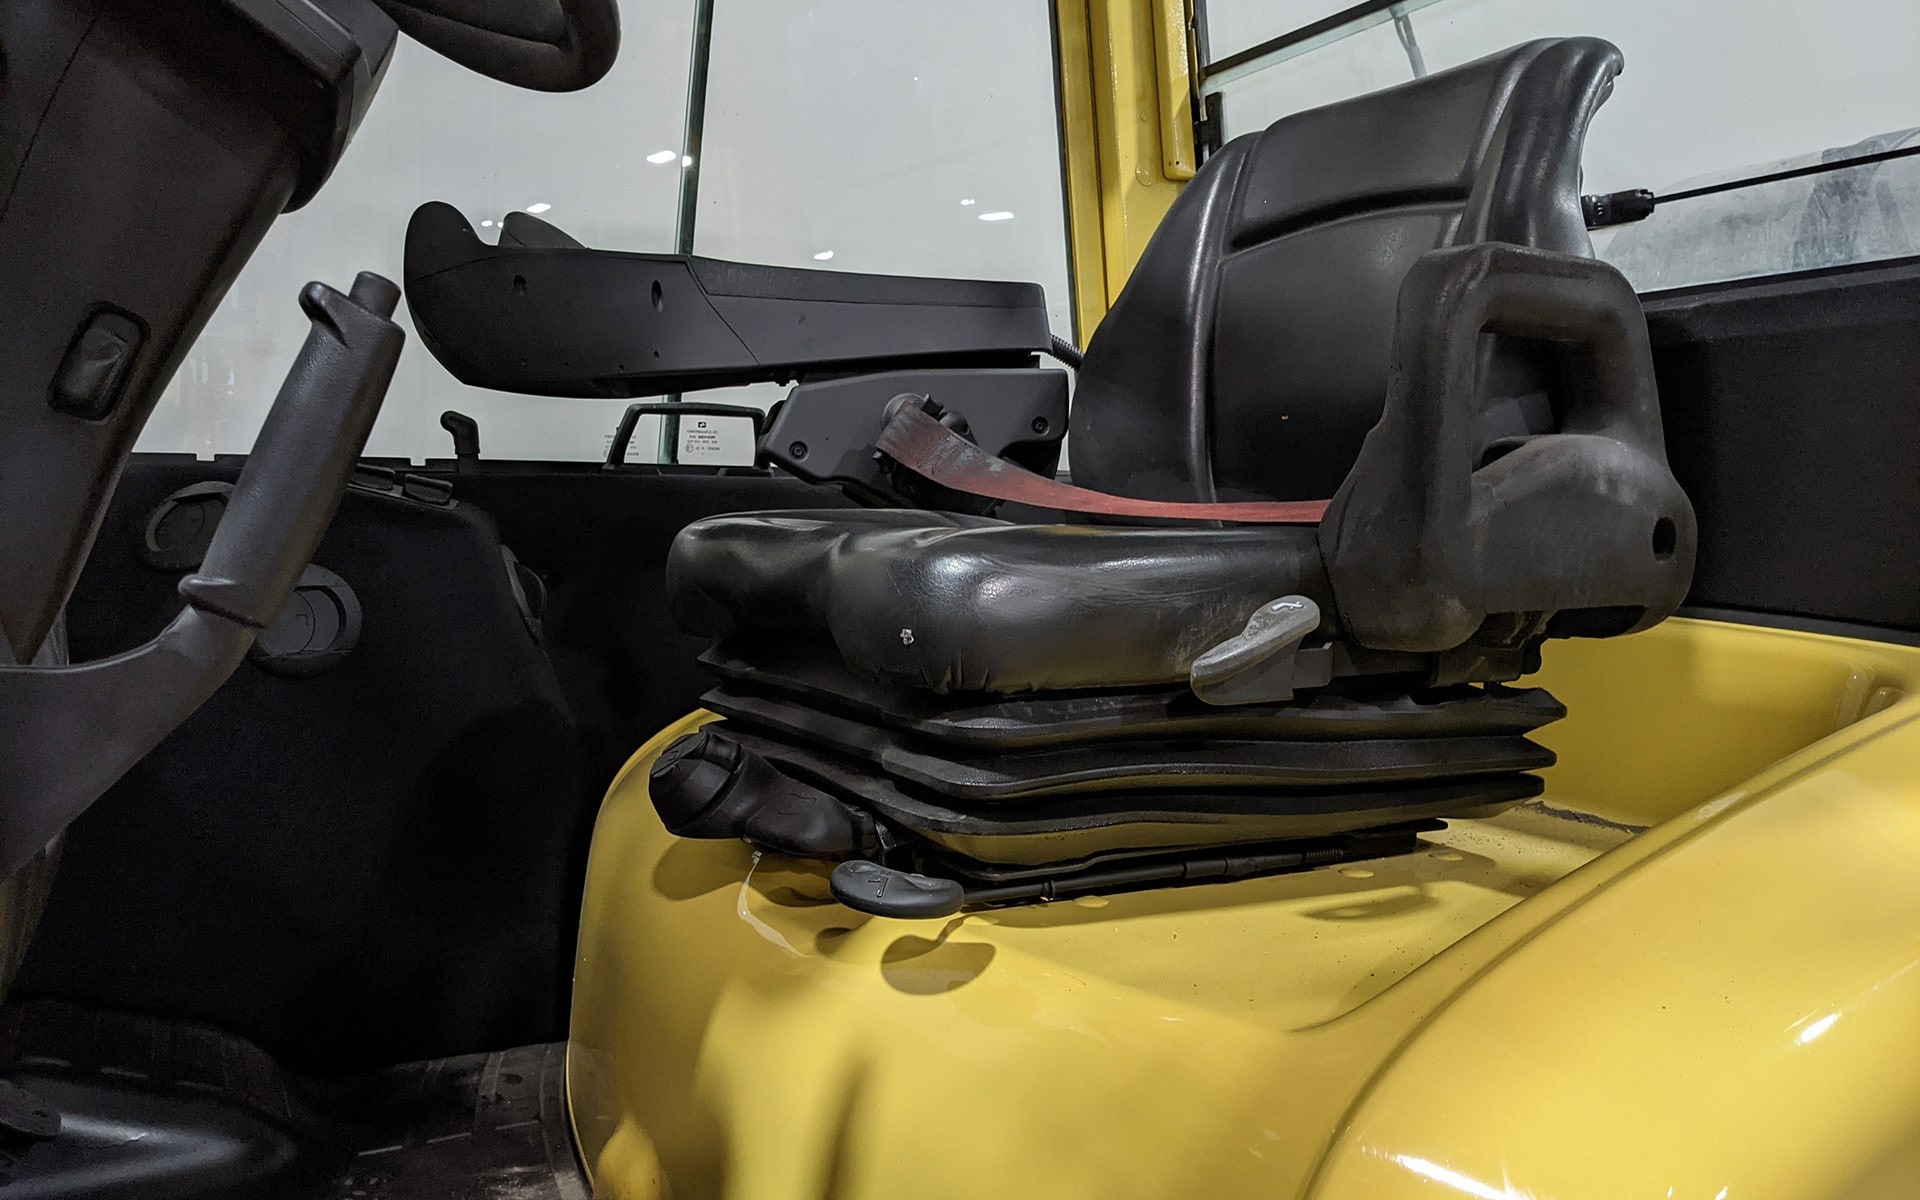 Used 2017 HYSTER H100FT  | Cary, IL